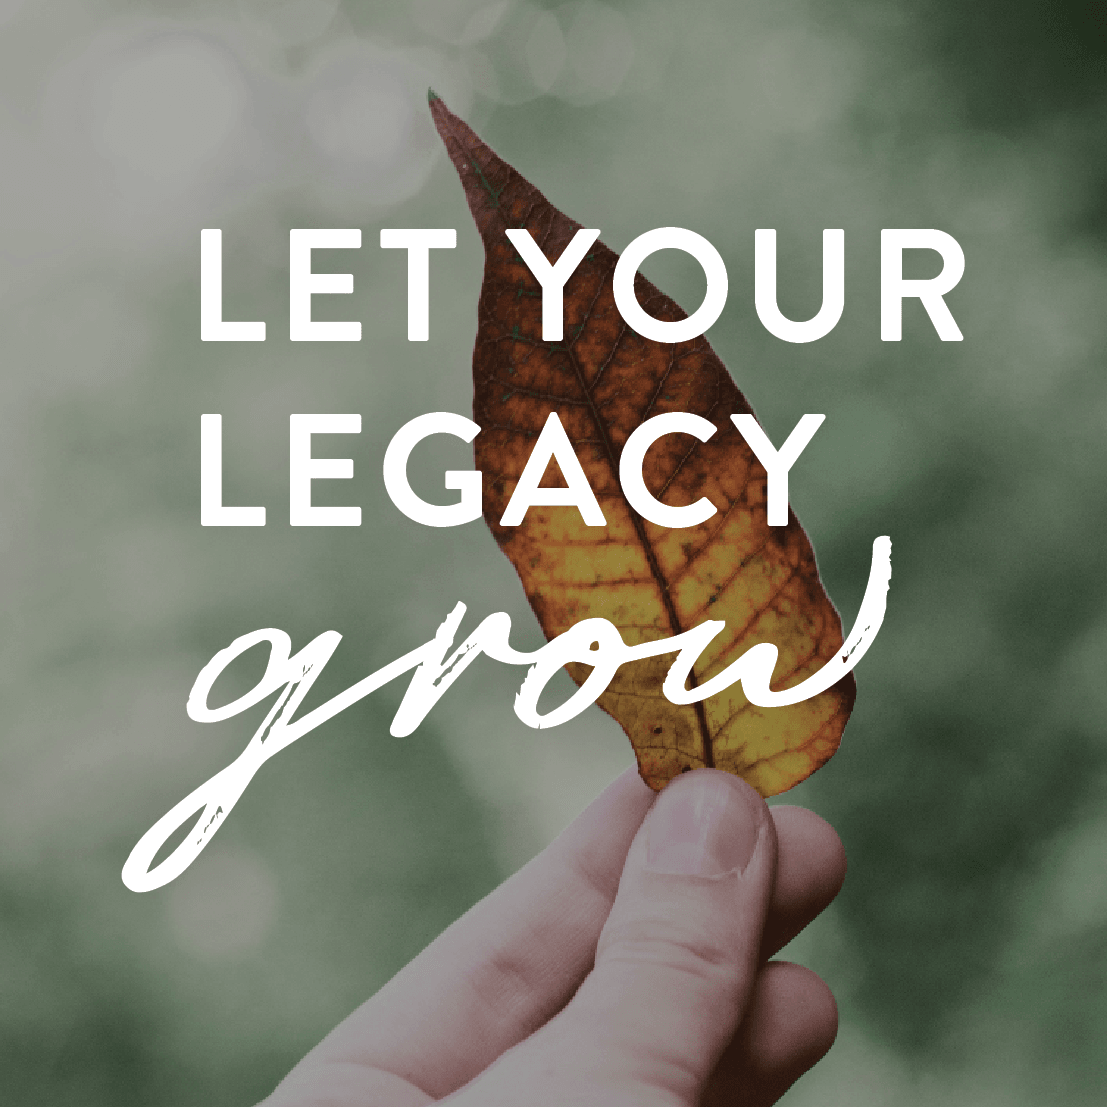 Text over image: Let your legacy grow